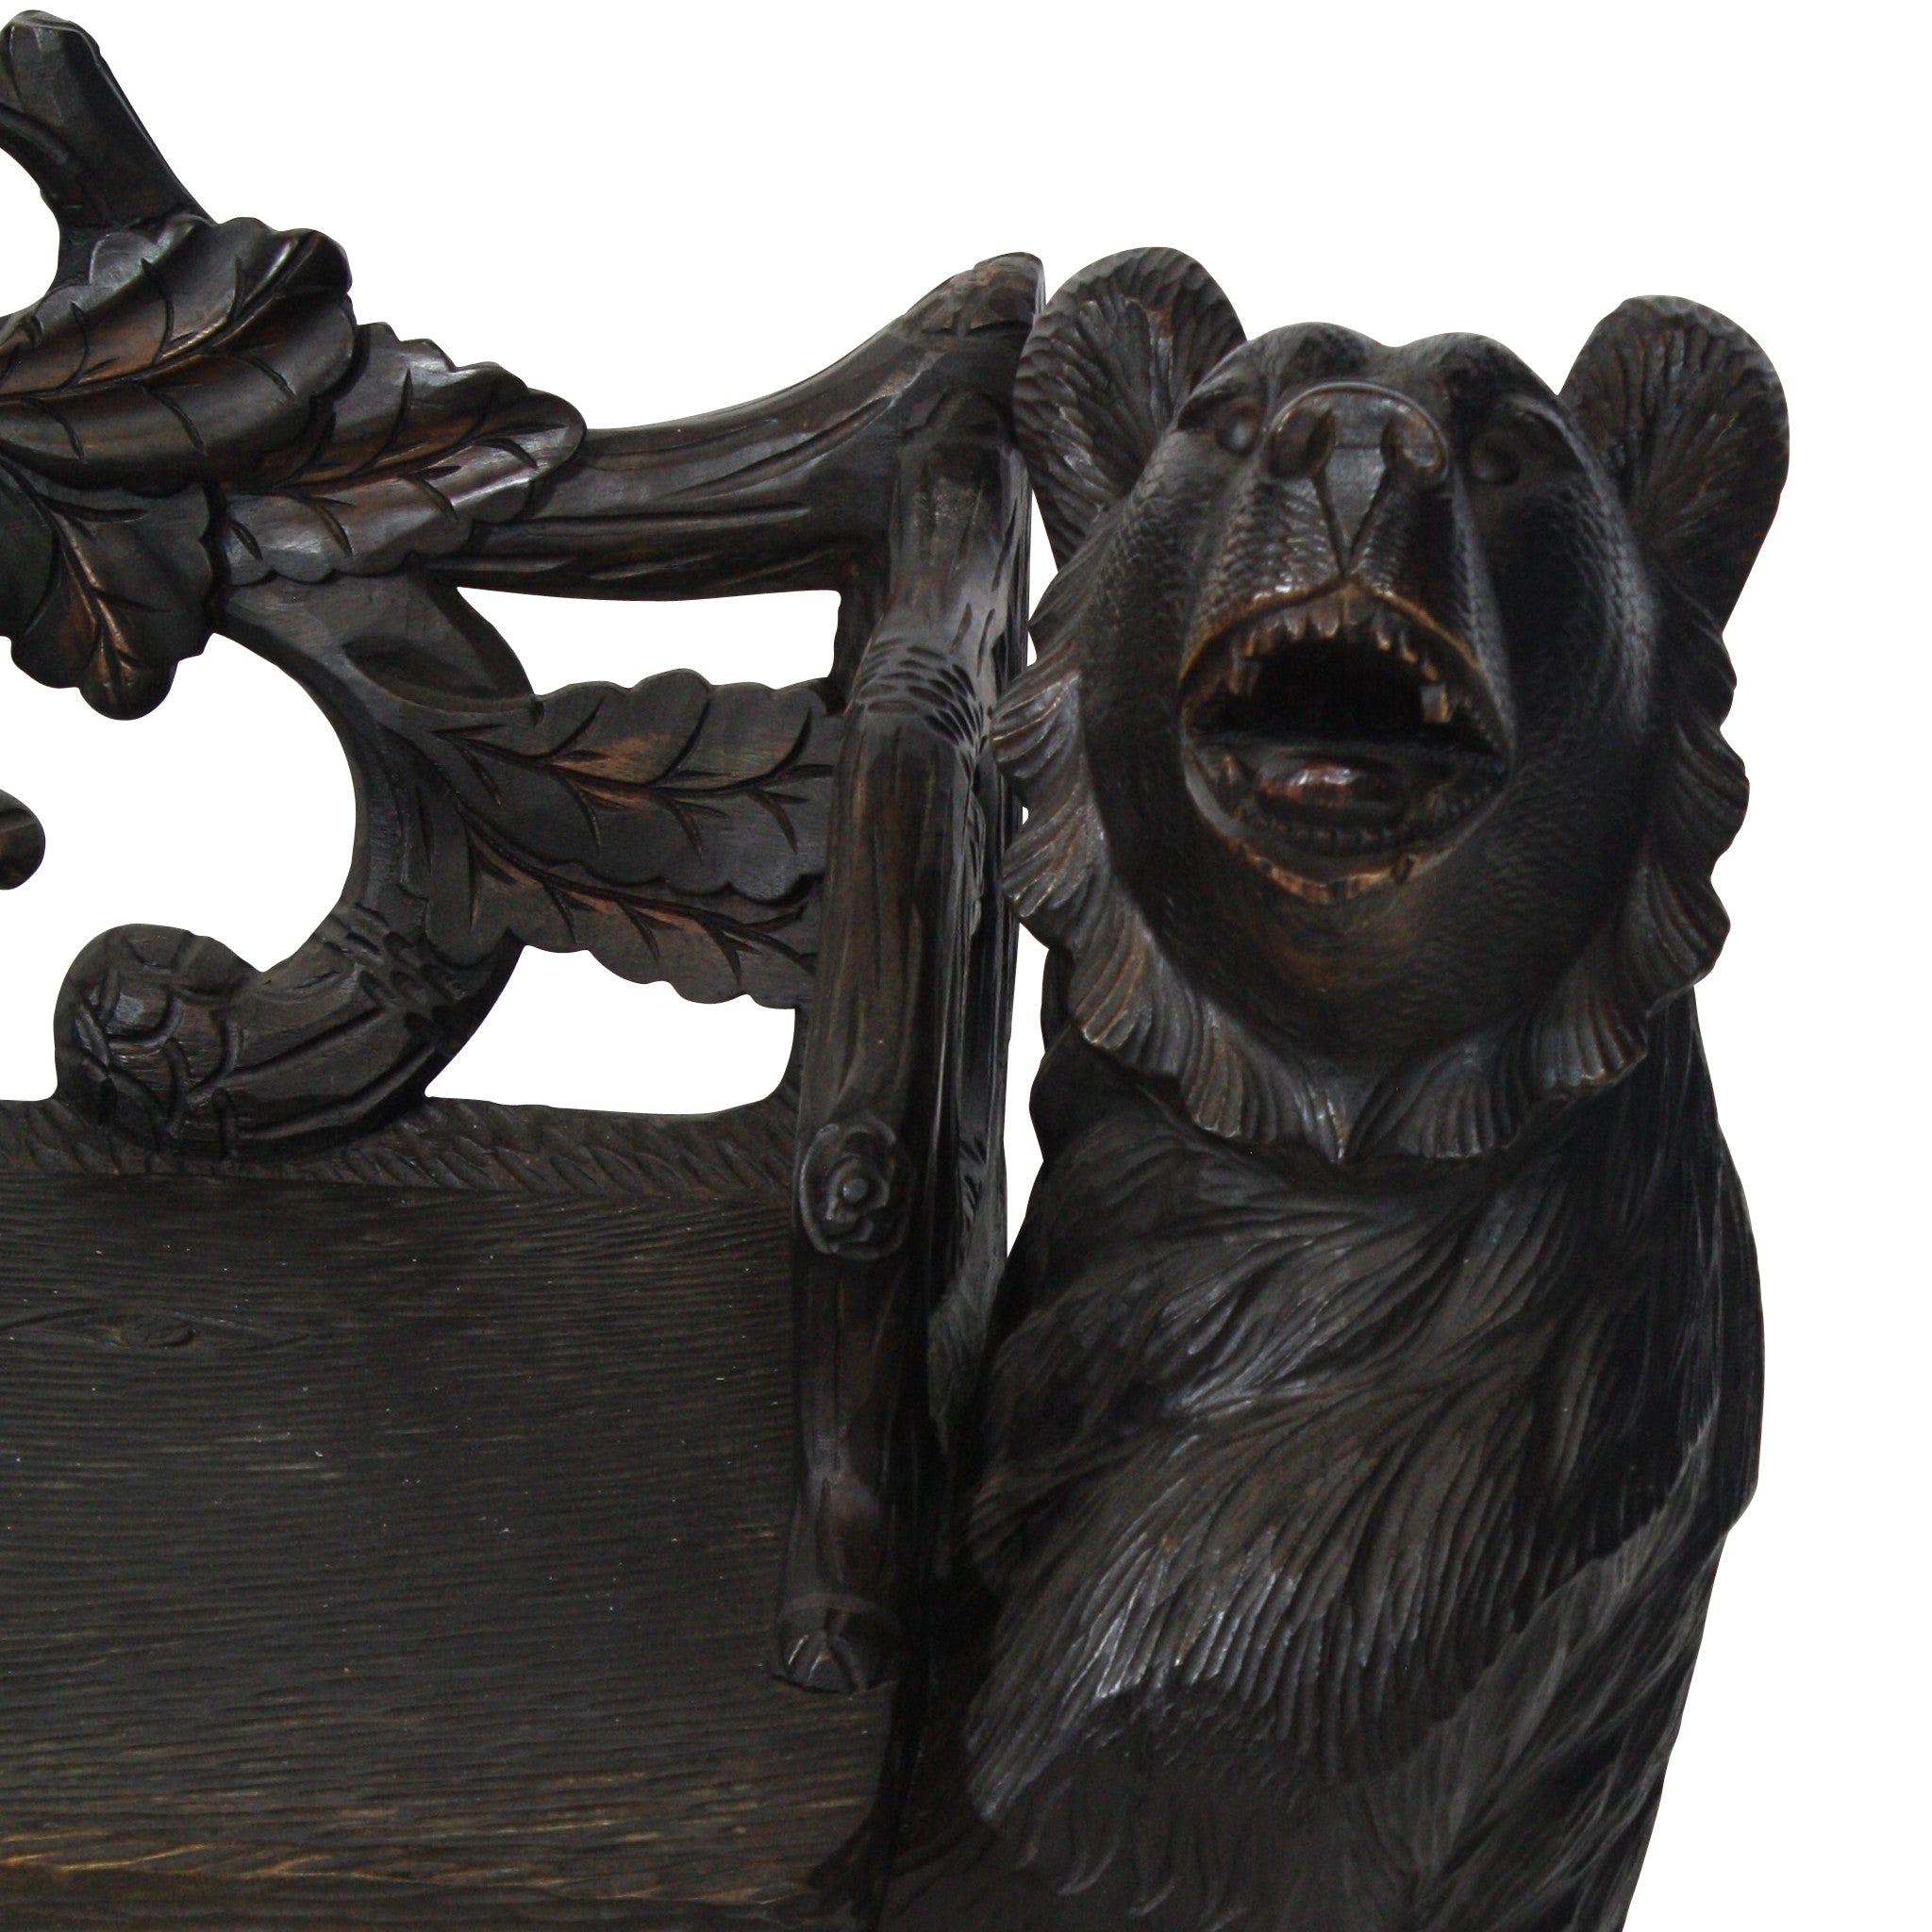 ski-country-antiques - Black Forest Bear Bench